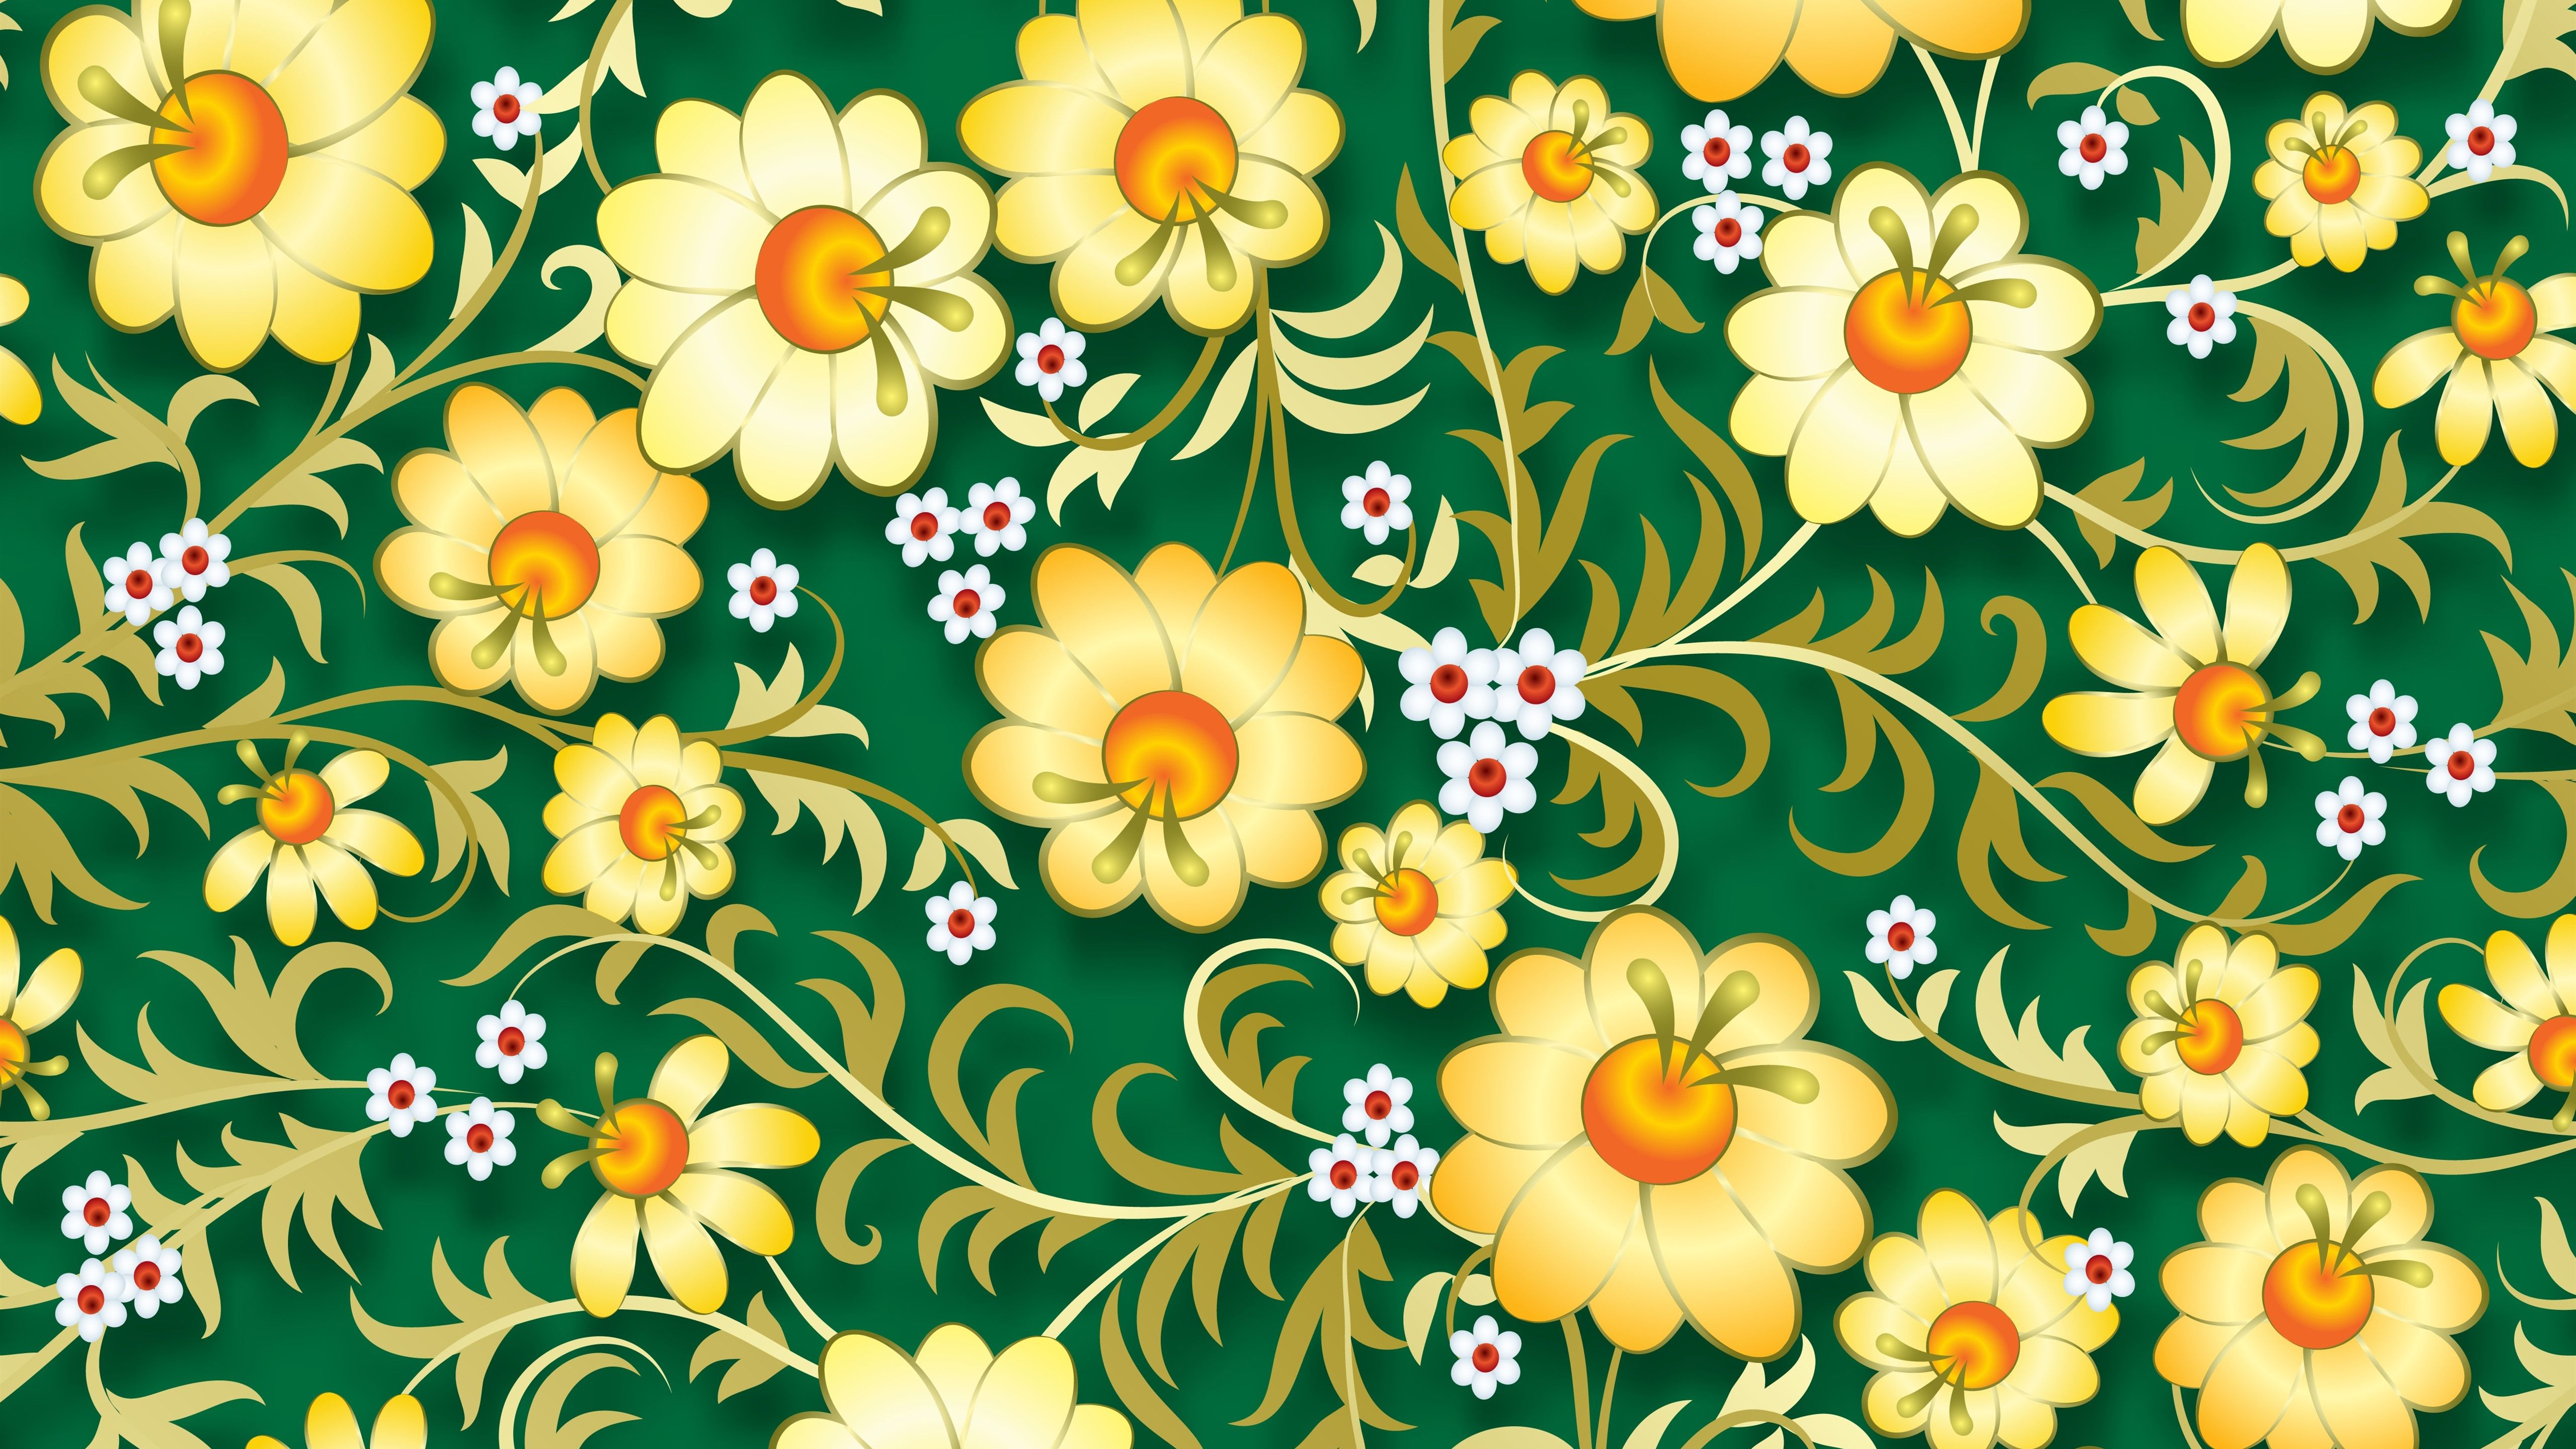 Wallpaper Vector flowers background 5120x2880 UHD 5K Picture, Image